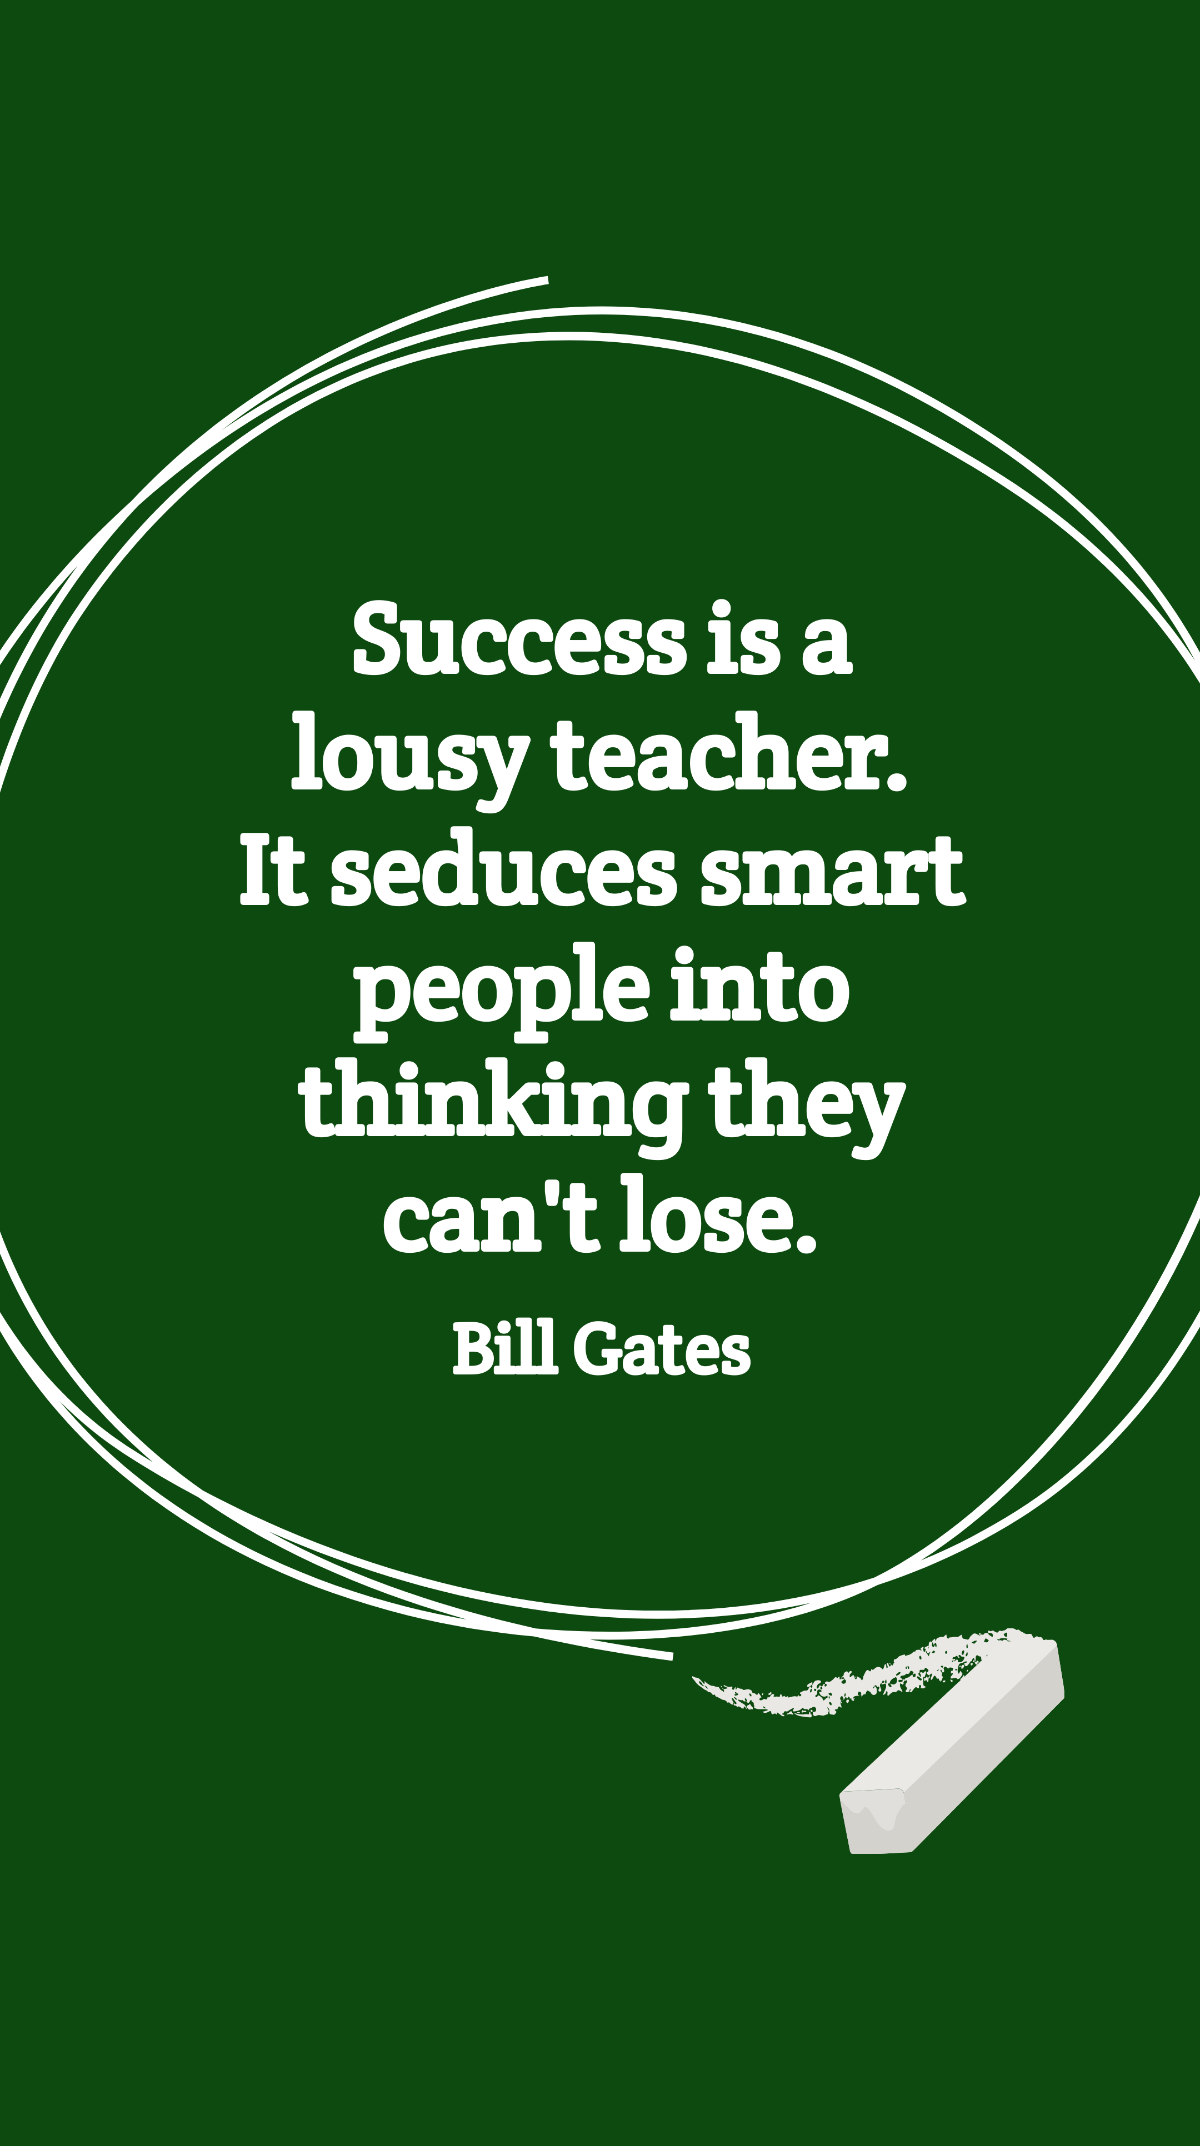 Bill Gates - Success is a lousy teacher. It seduces smart people into thinking they can't lose. Template